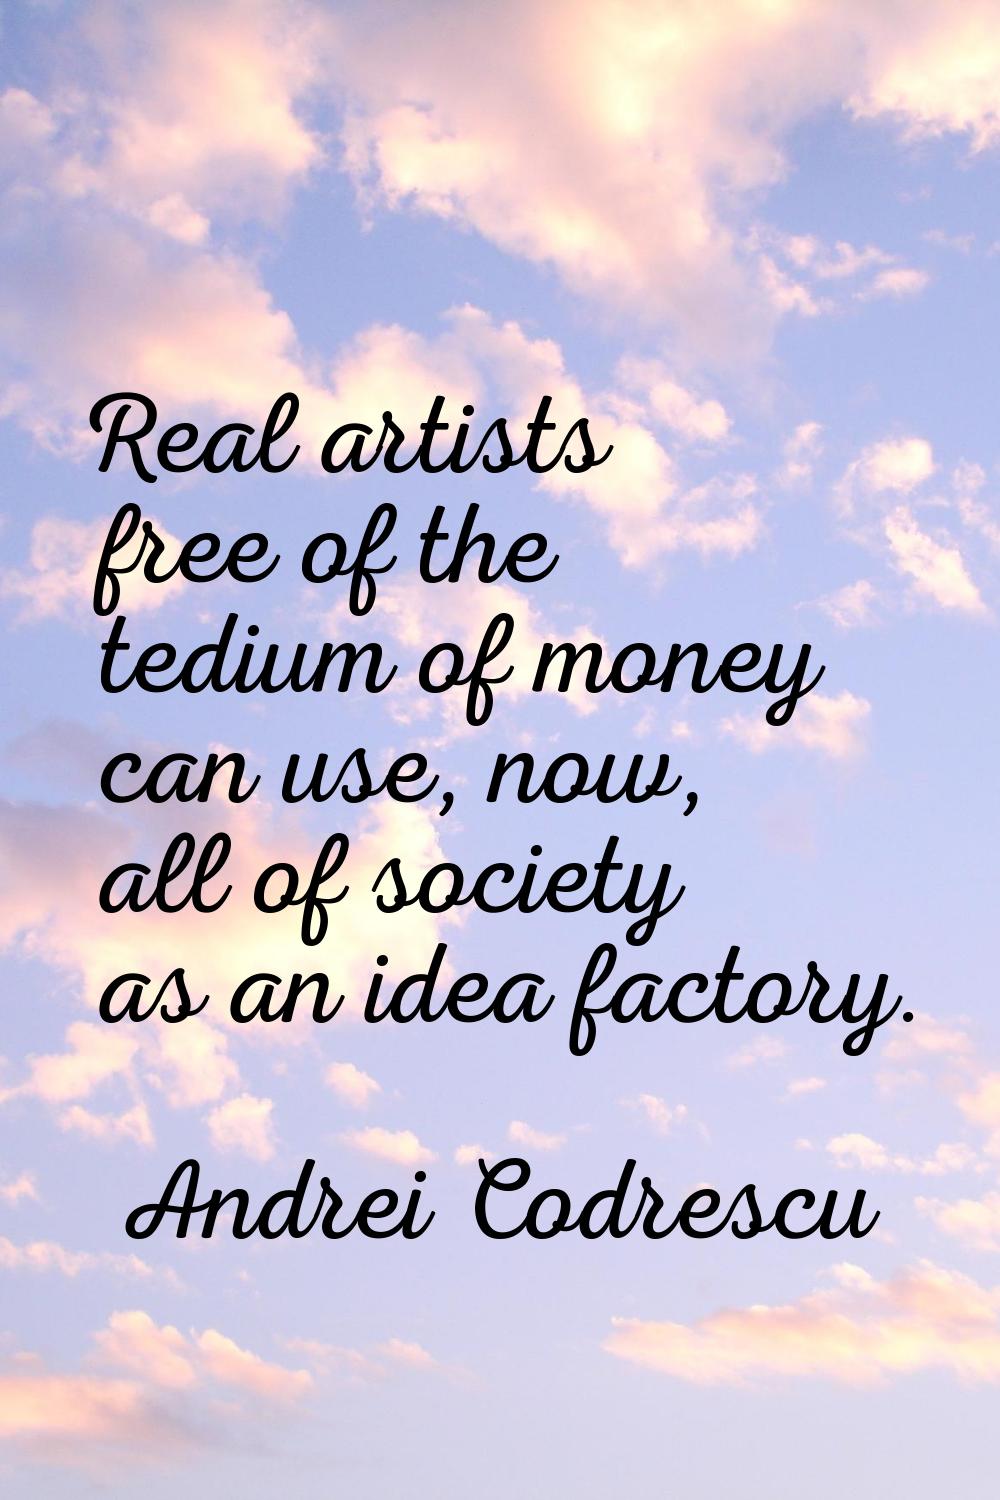 Real artists free of the tedium of money can use, now, all of society as an idea factory.